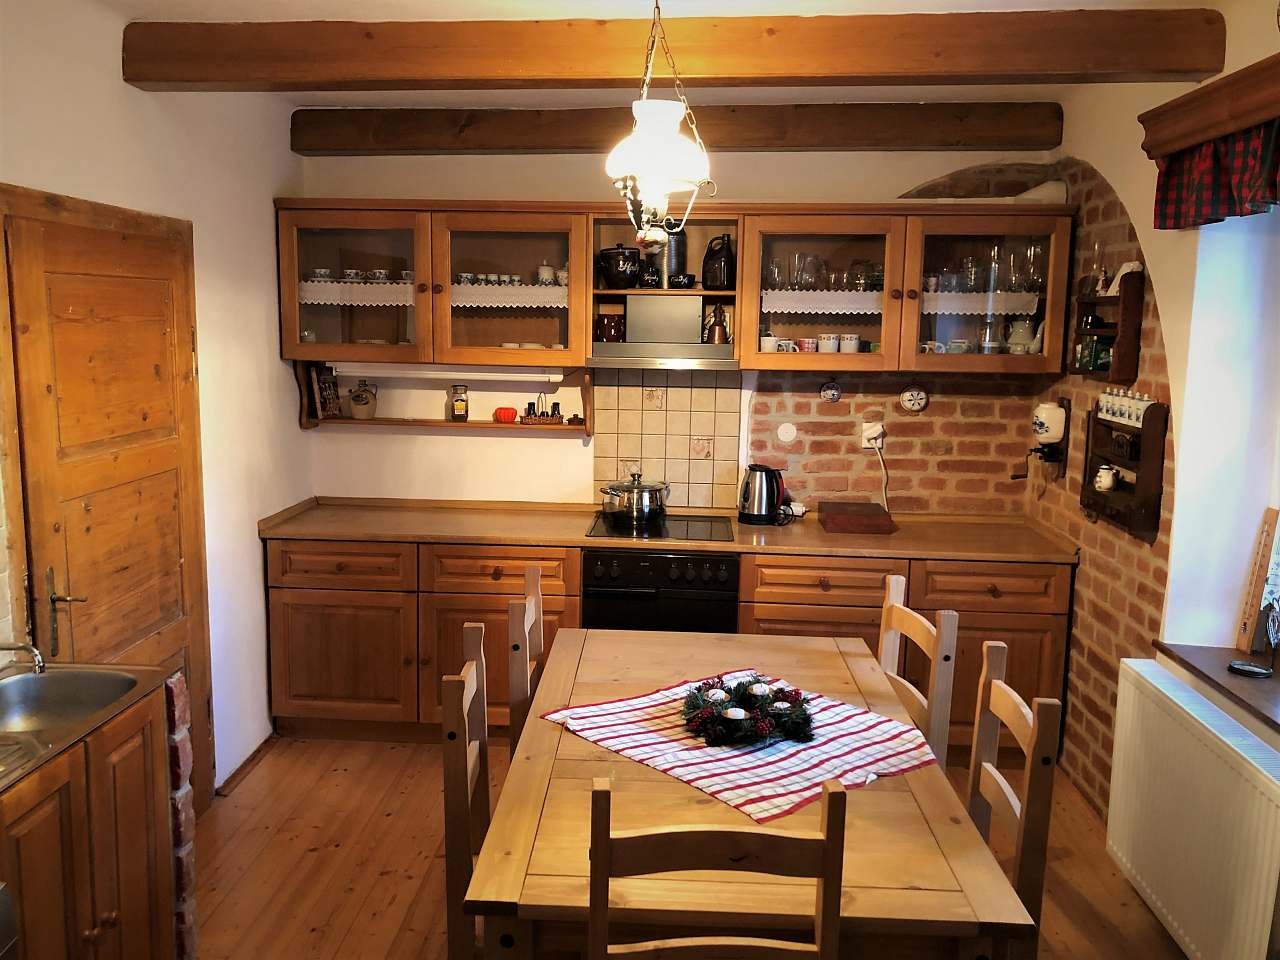 Large apartment kitchen with dining table